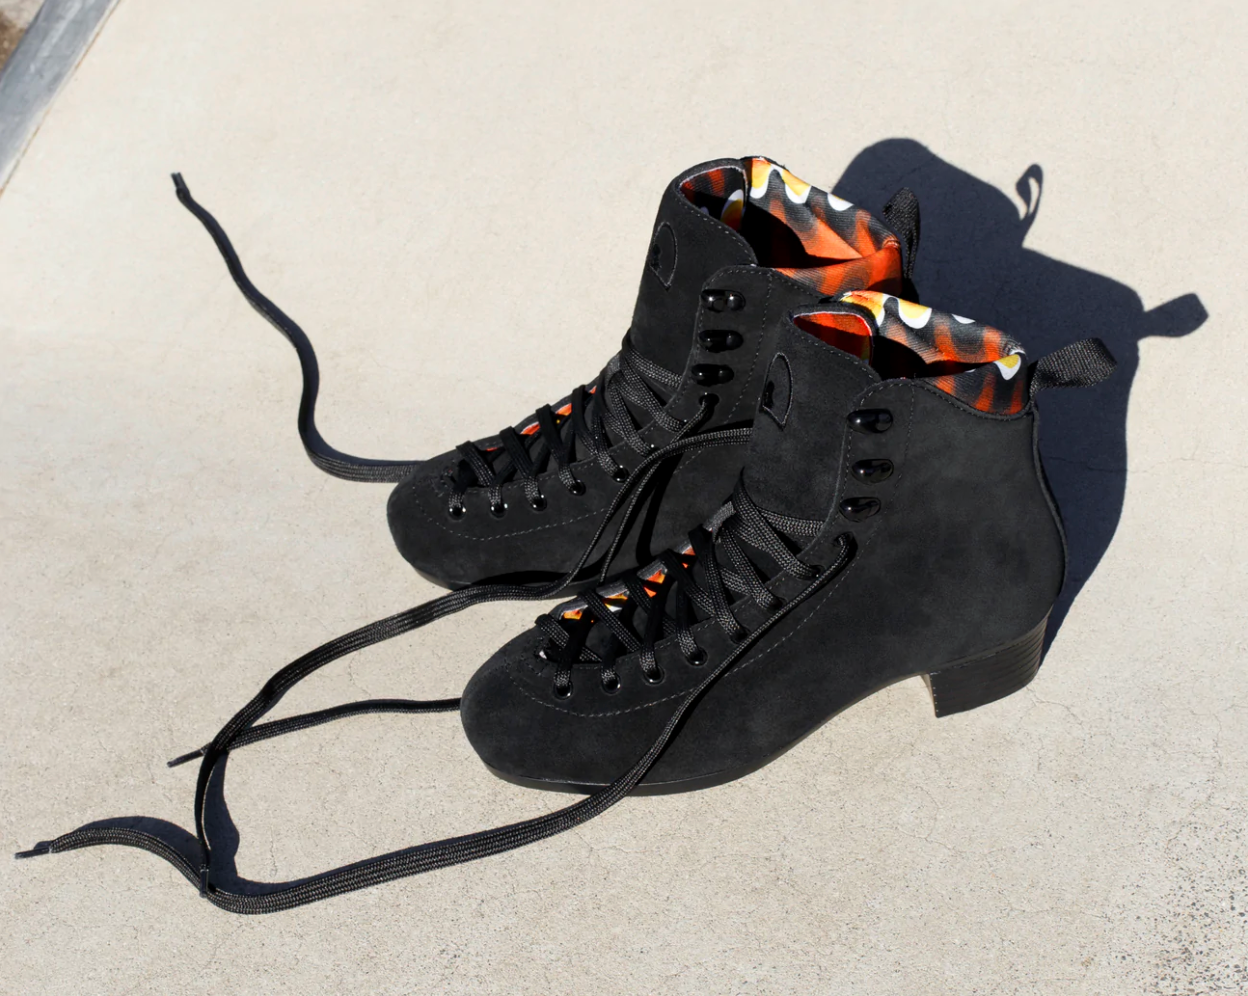 Chuffed Skates Pro Boots Black -Boot Only